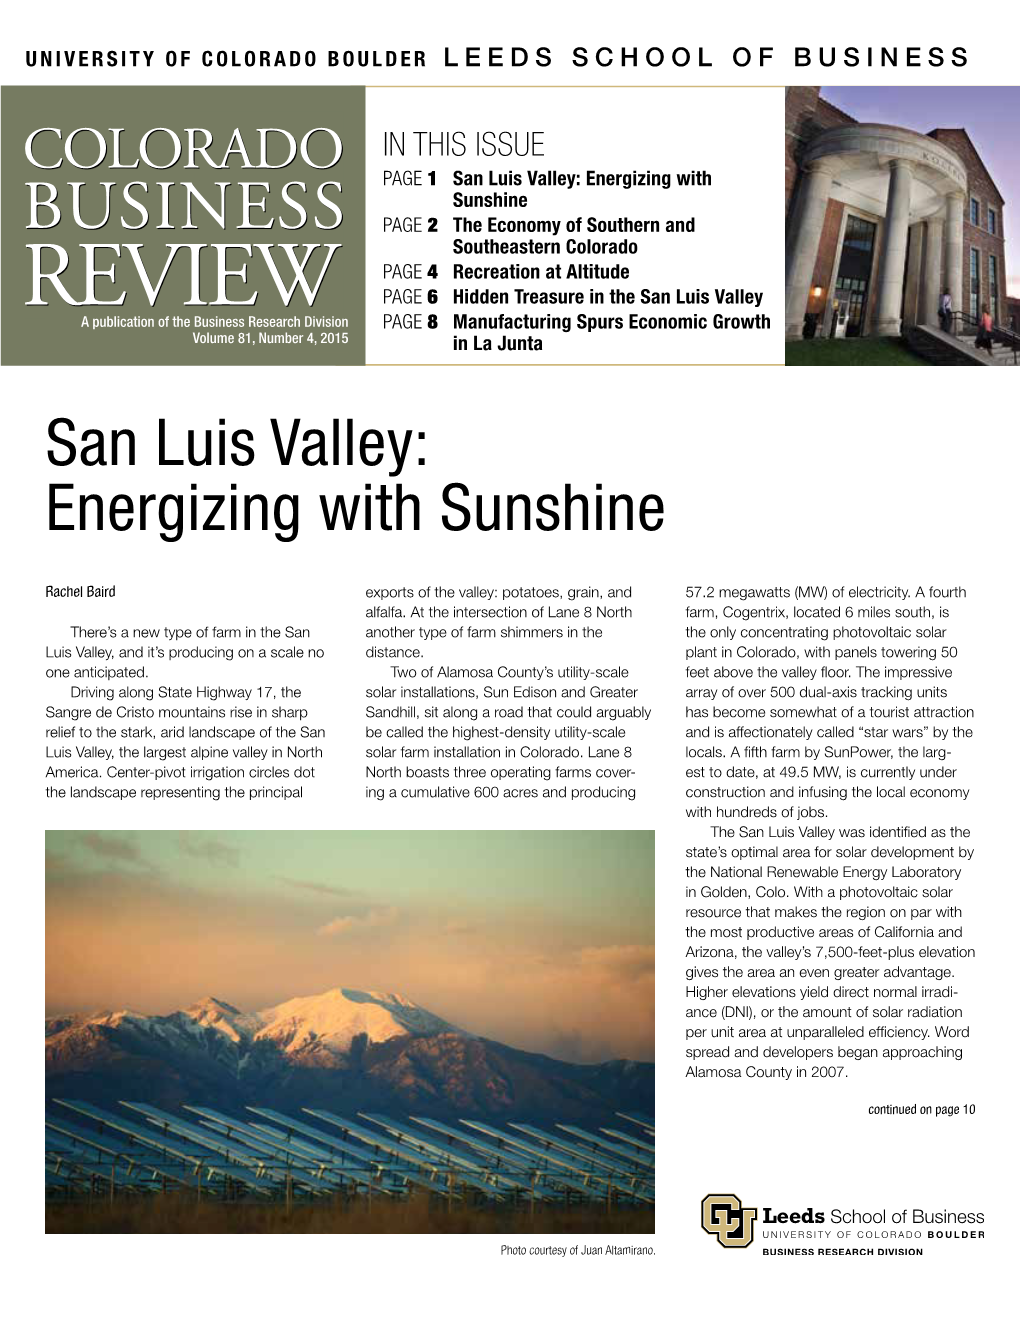 San Luis Valley: Energizing with Sunshine